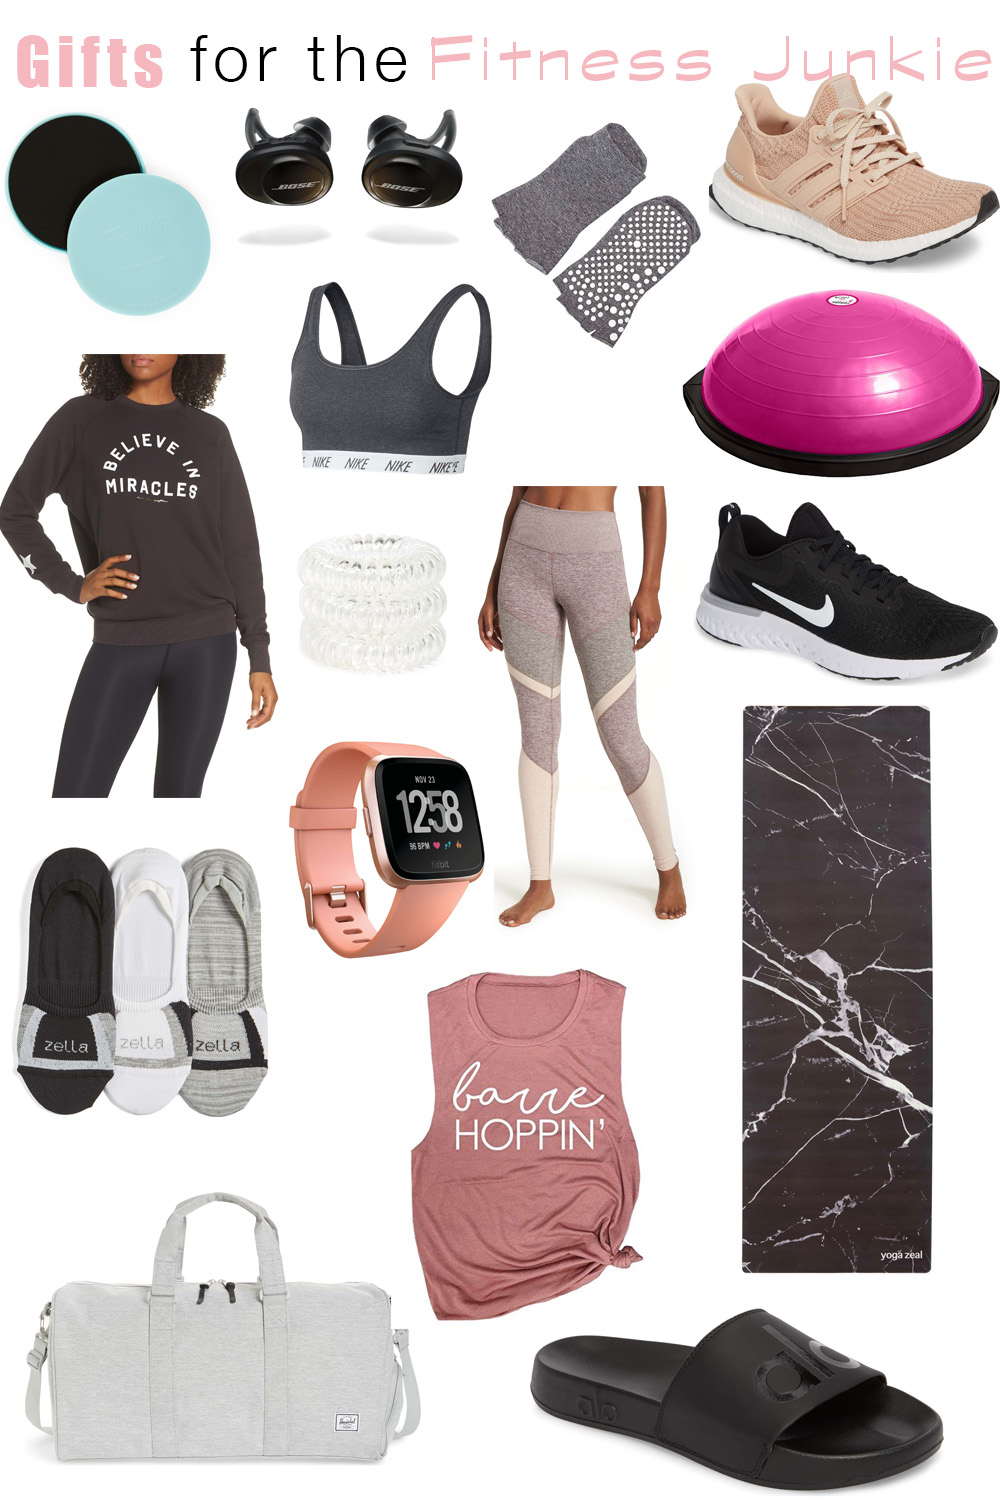 Erin Elizabeth of Wink and a Twirl shares the perfect holiday gifts for the fitness junkie in your life